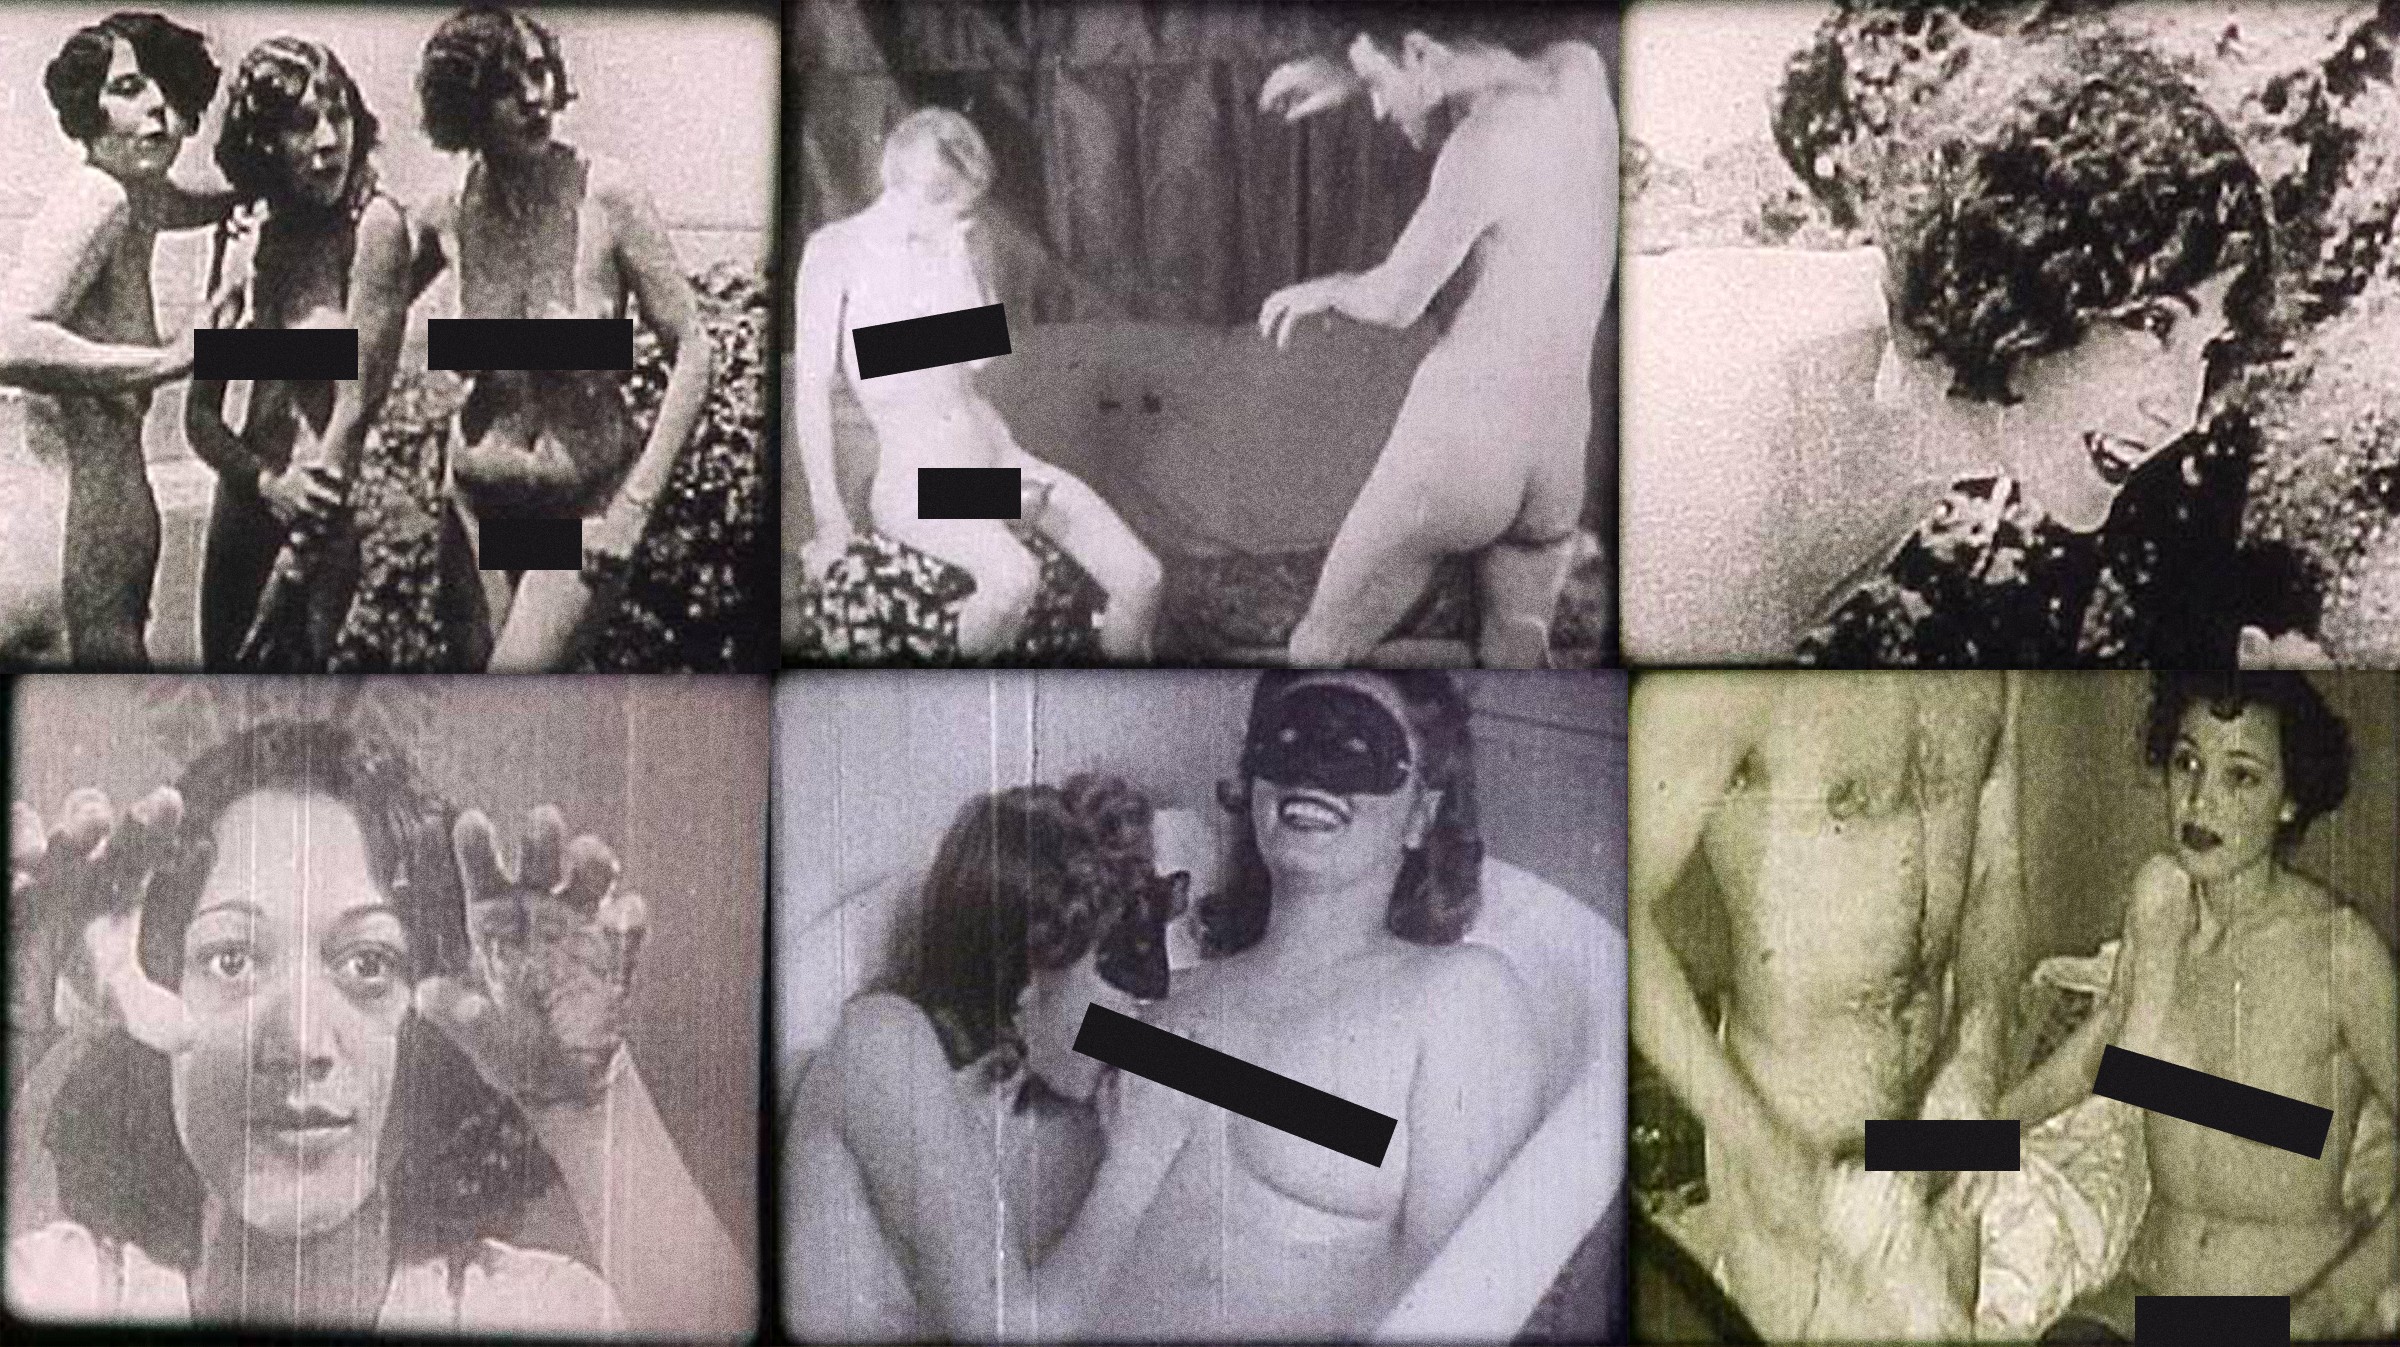 Xxx Video Com 1920 - Porn from the 1920s Was More Wild and Hardcore Than You Could ...